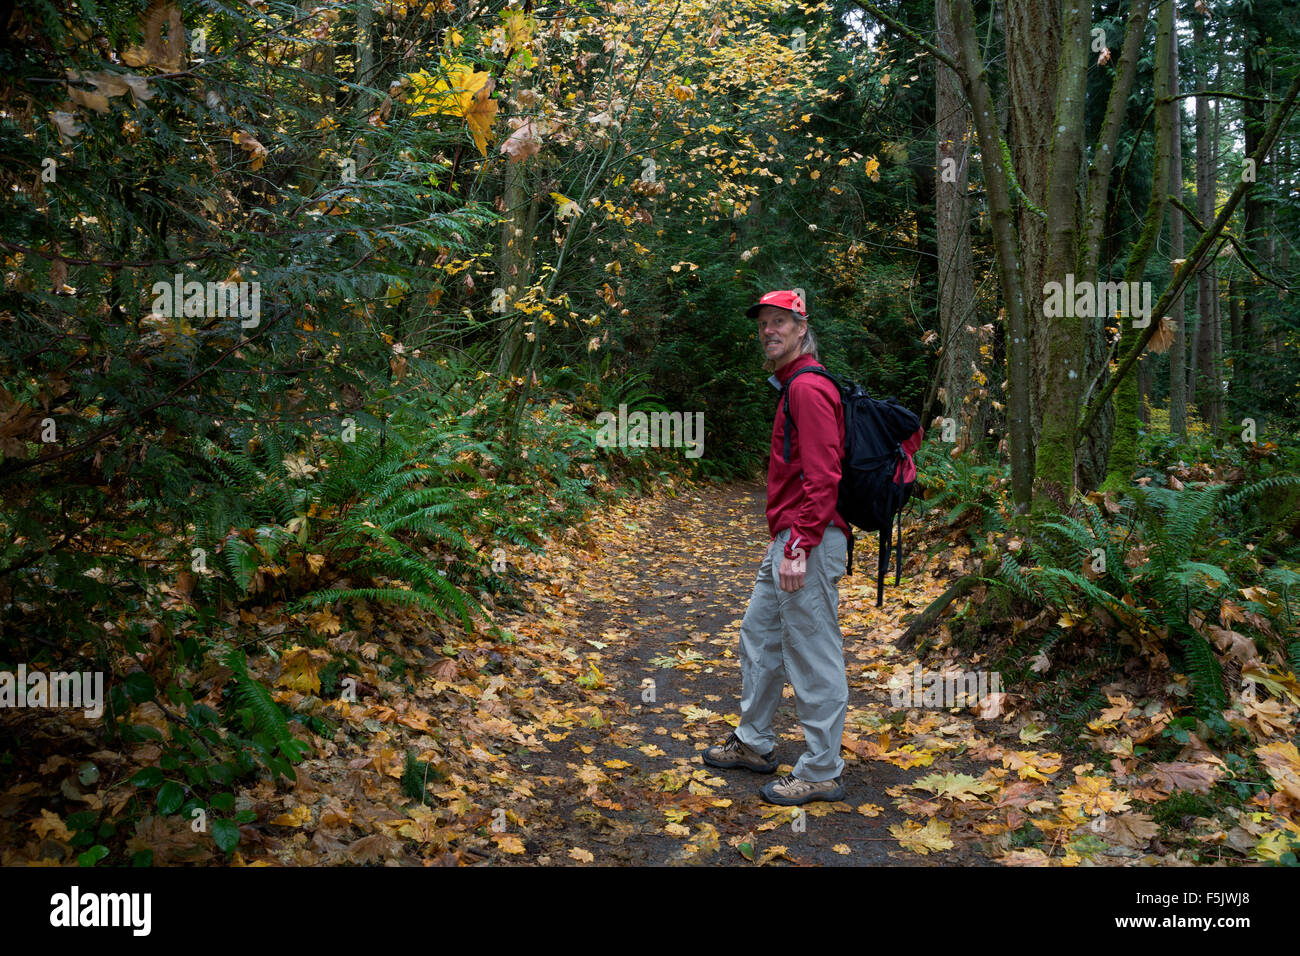 WA10843-00...WASHINGTON - Hiker following trail through the thick forest of Bridal Trails State Park near Kirkland. Stock Photo